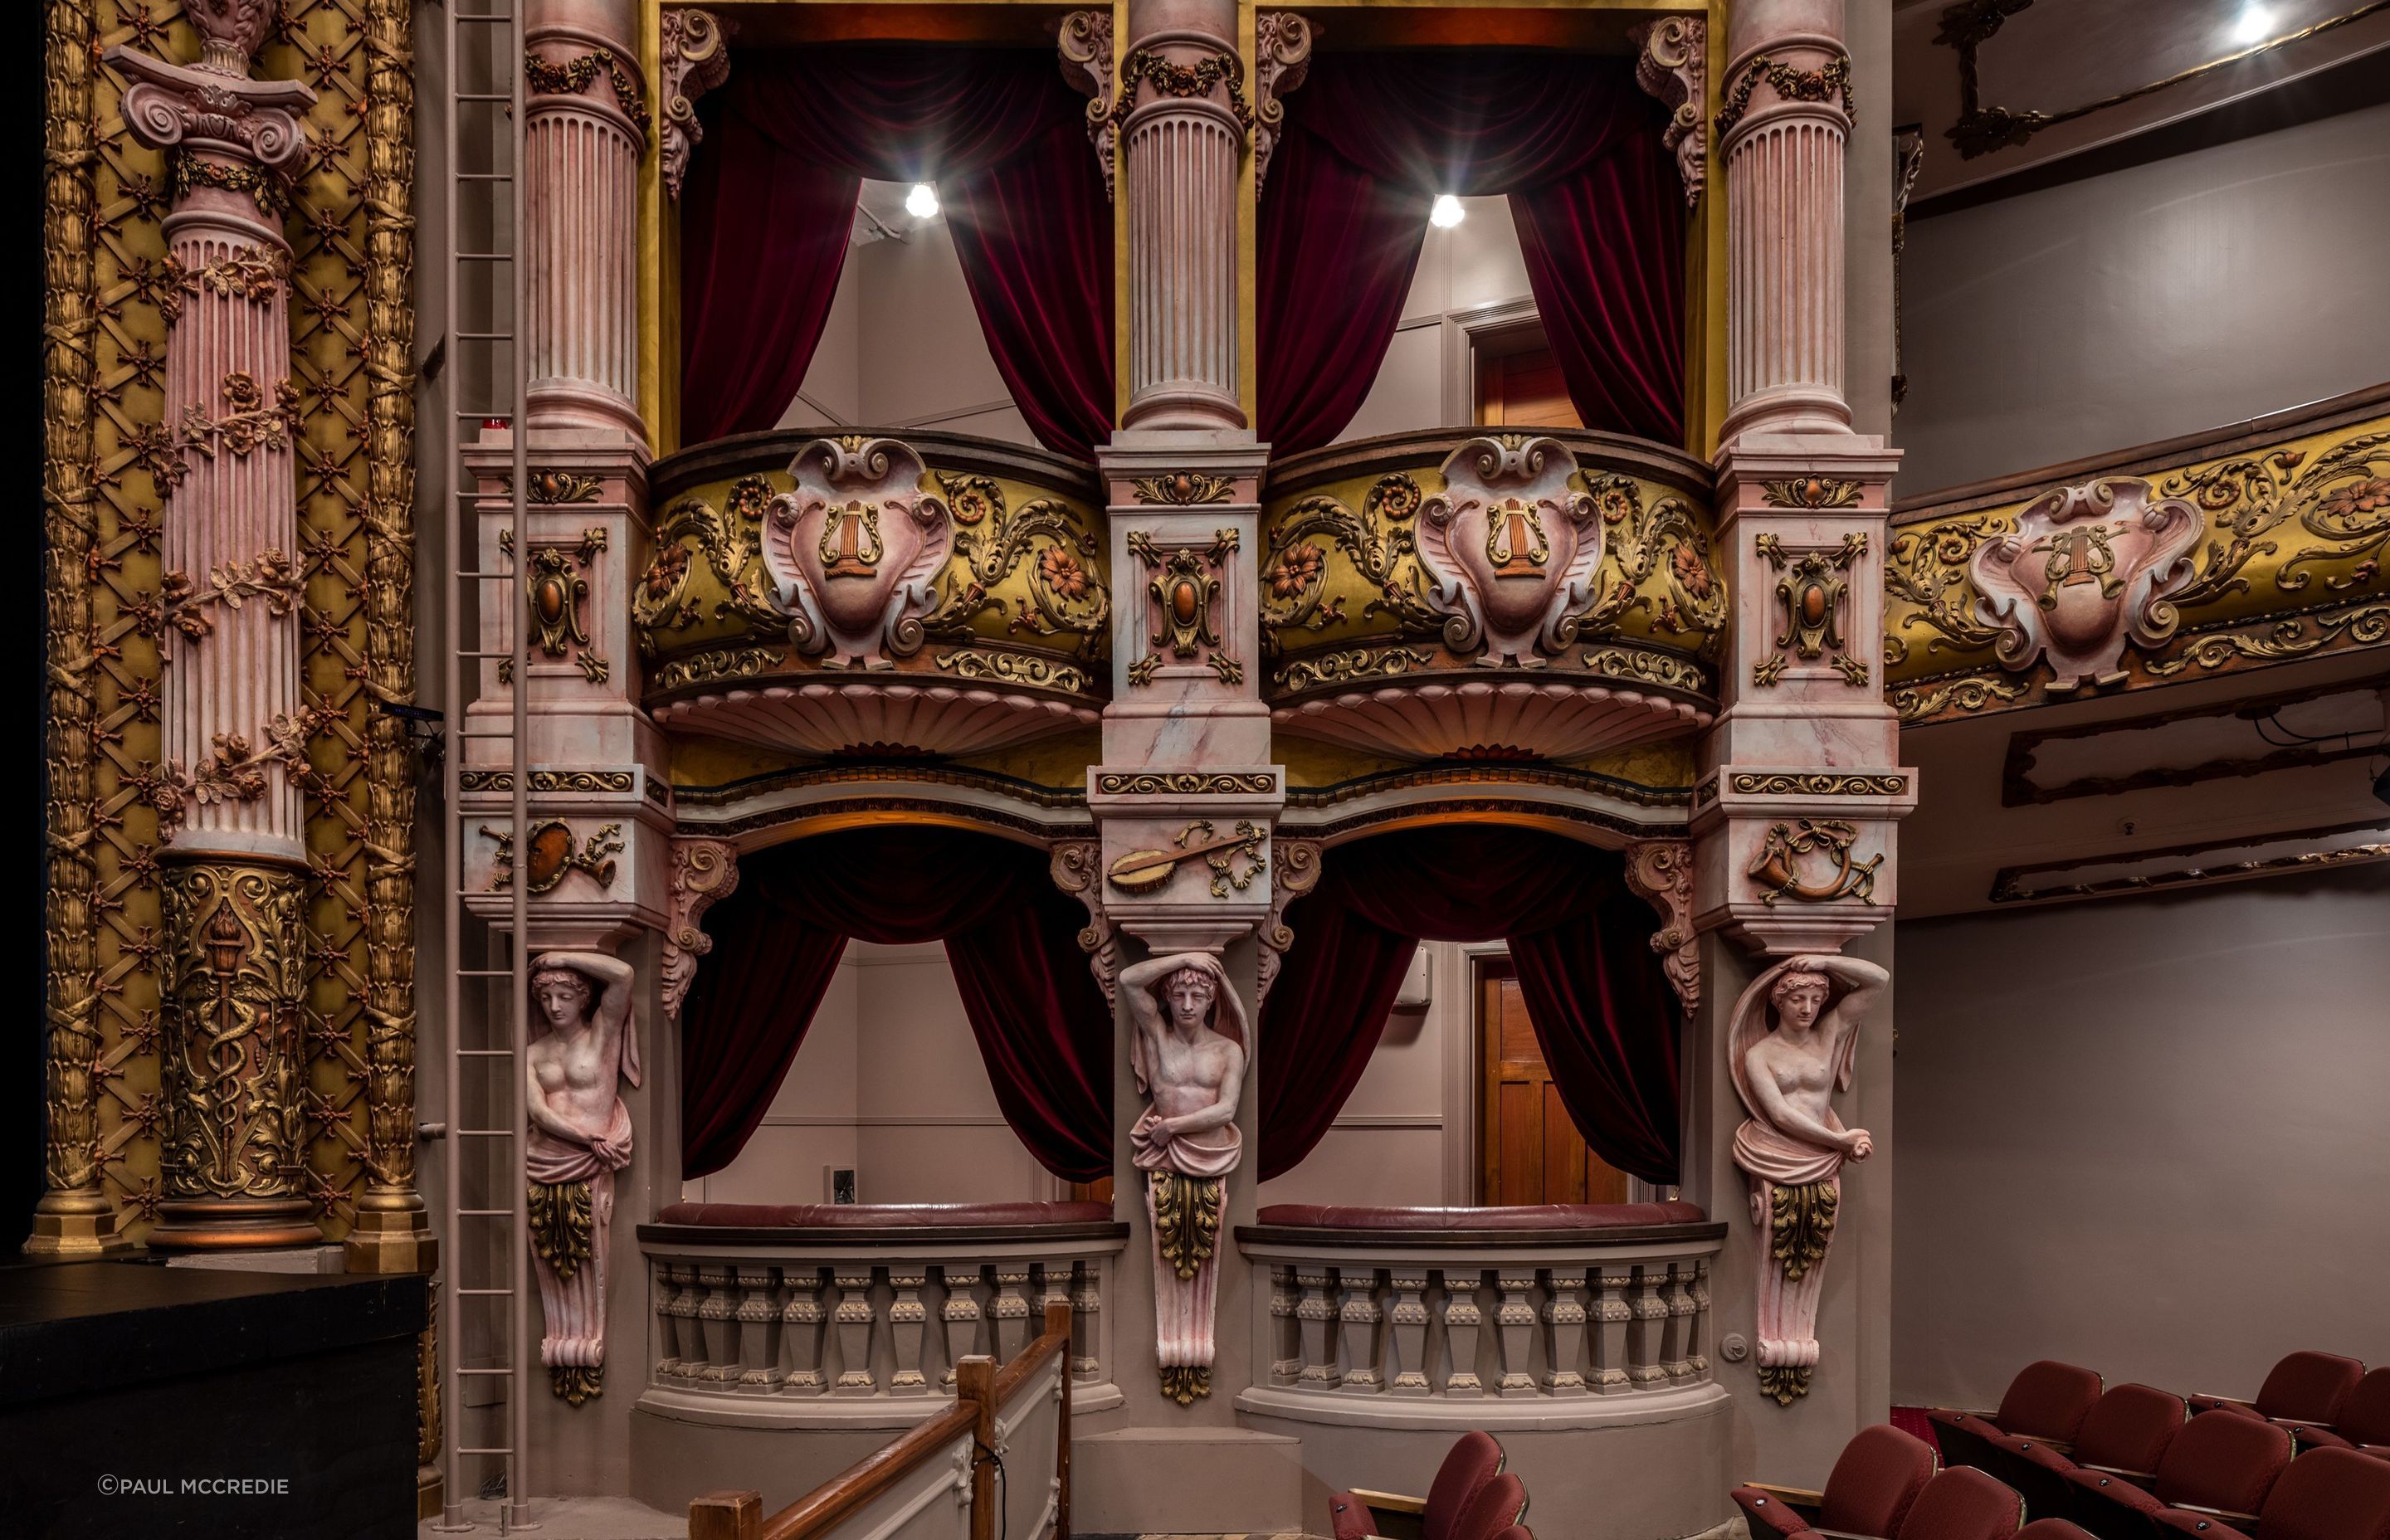 Working closely with Heritage New Zealand, the final palette for the St. James Theatre restoration consisted of soft pinks, velvety reds and pale greens, in a deliberate nod to the original 1912 scheme.